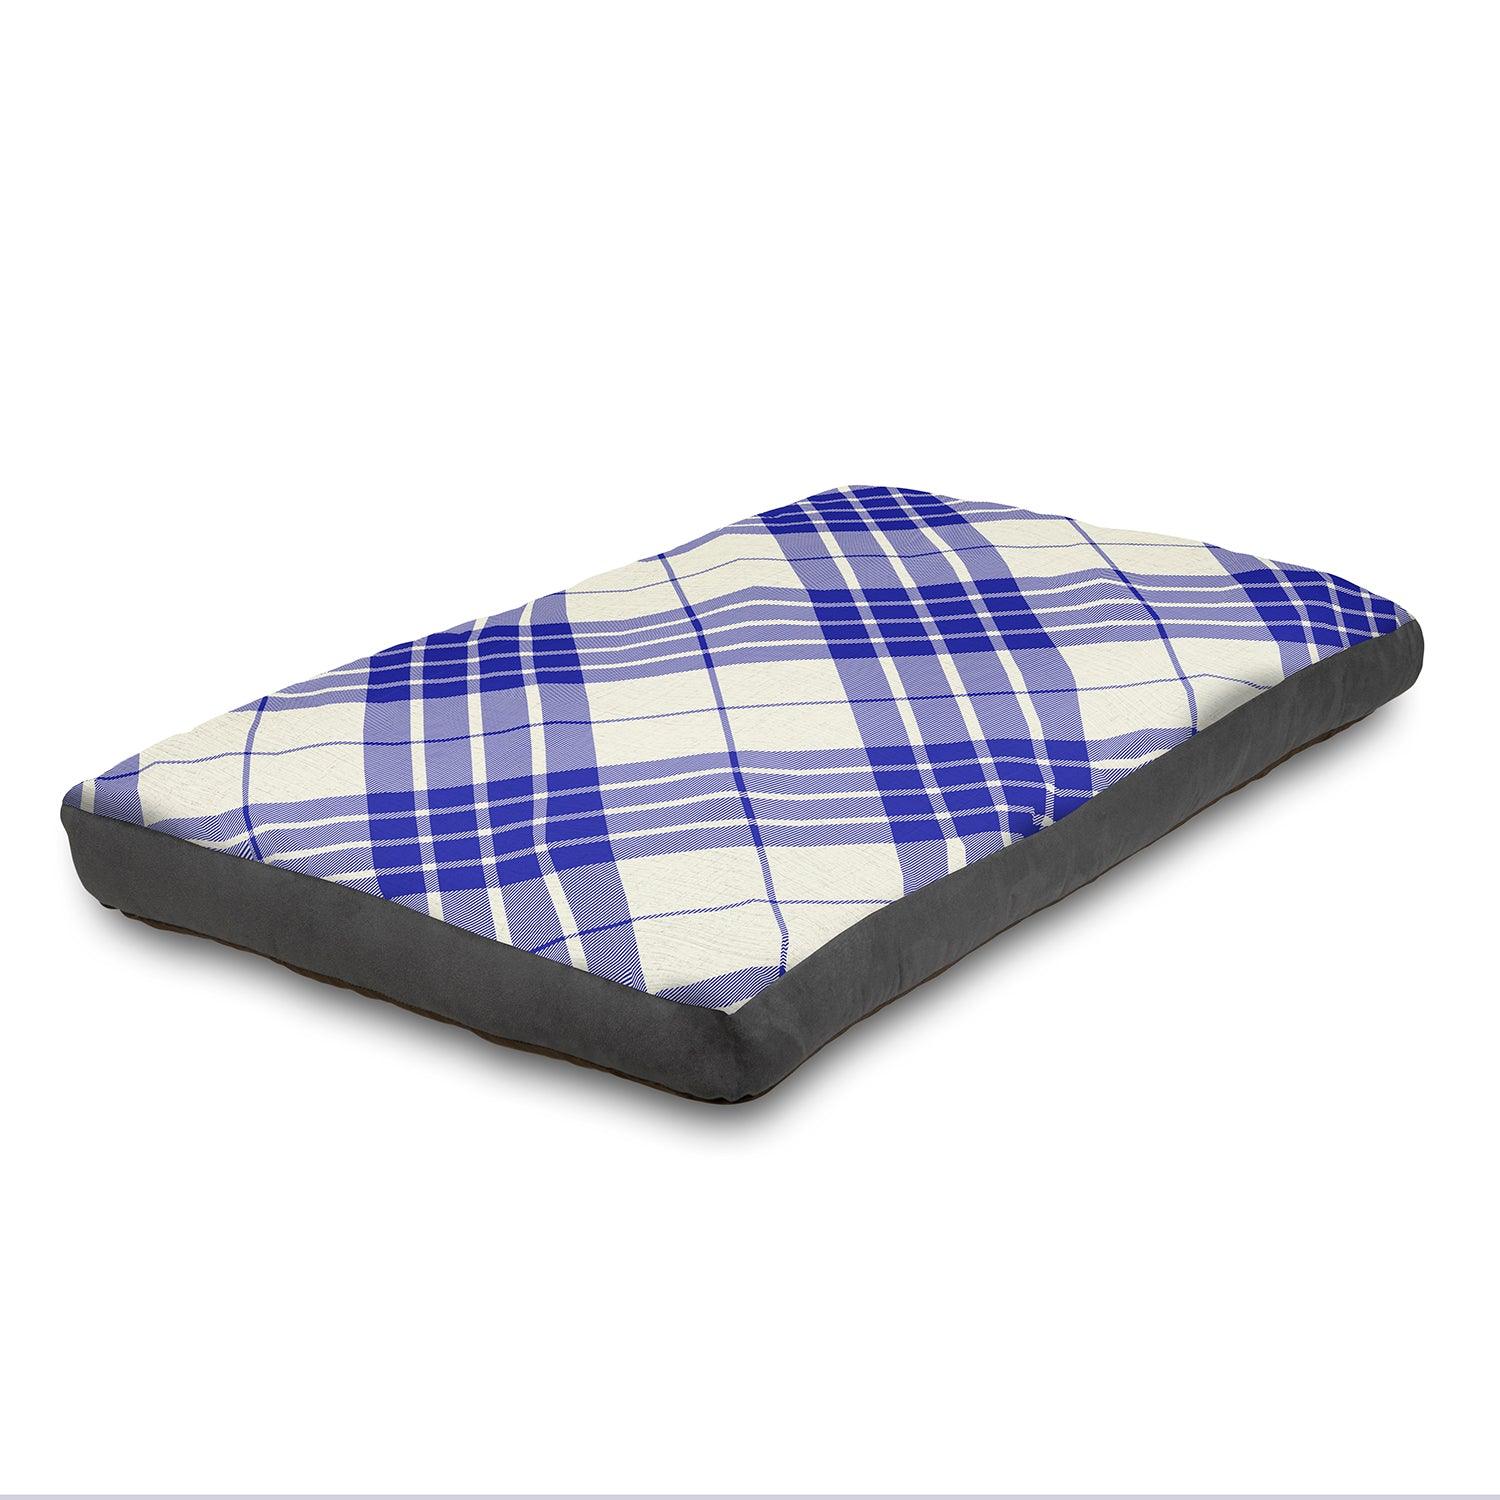 View Super Comfy Dog Bed Soft and Fluffy with Washable Cover XLarge 150 cm x 100 cm Blue information